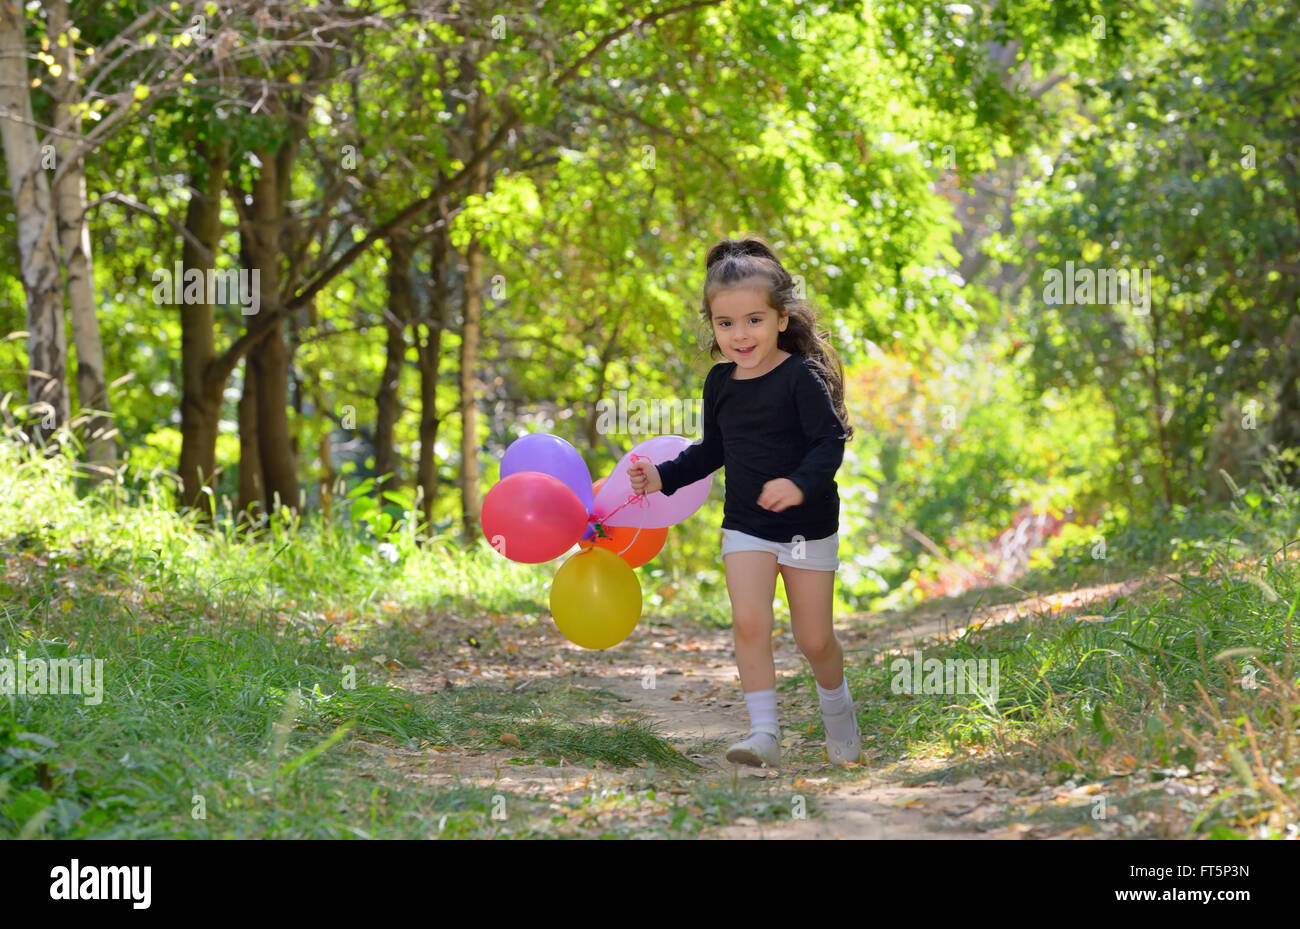 Little girl playing in autumn park with balloons Banque D'Images